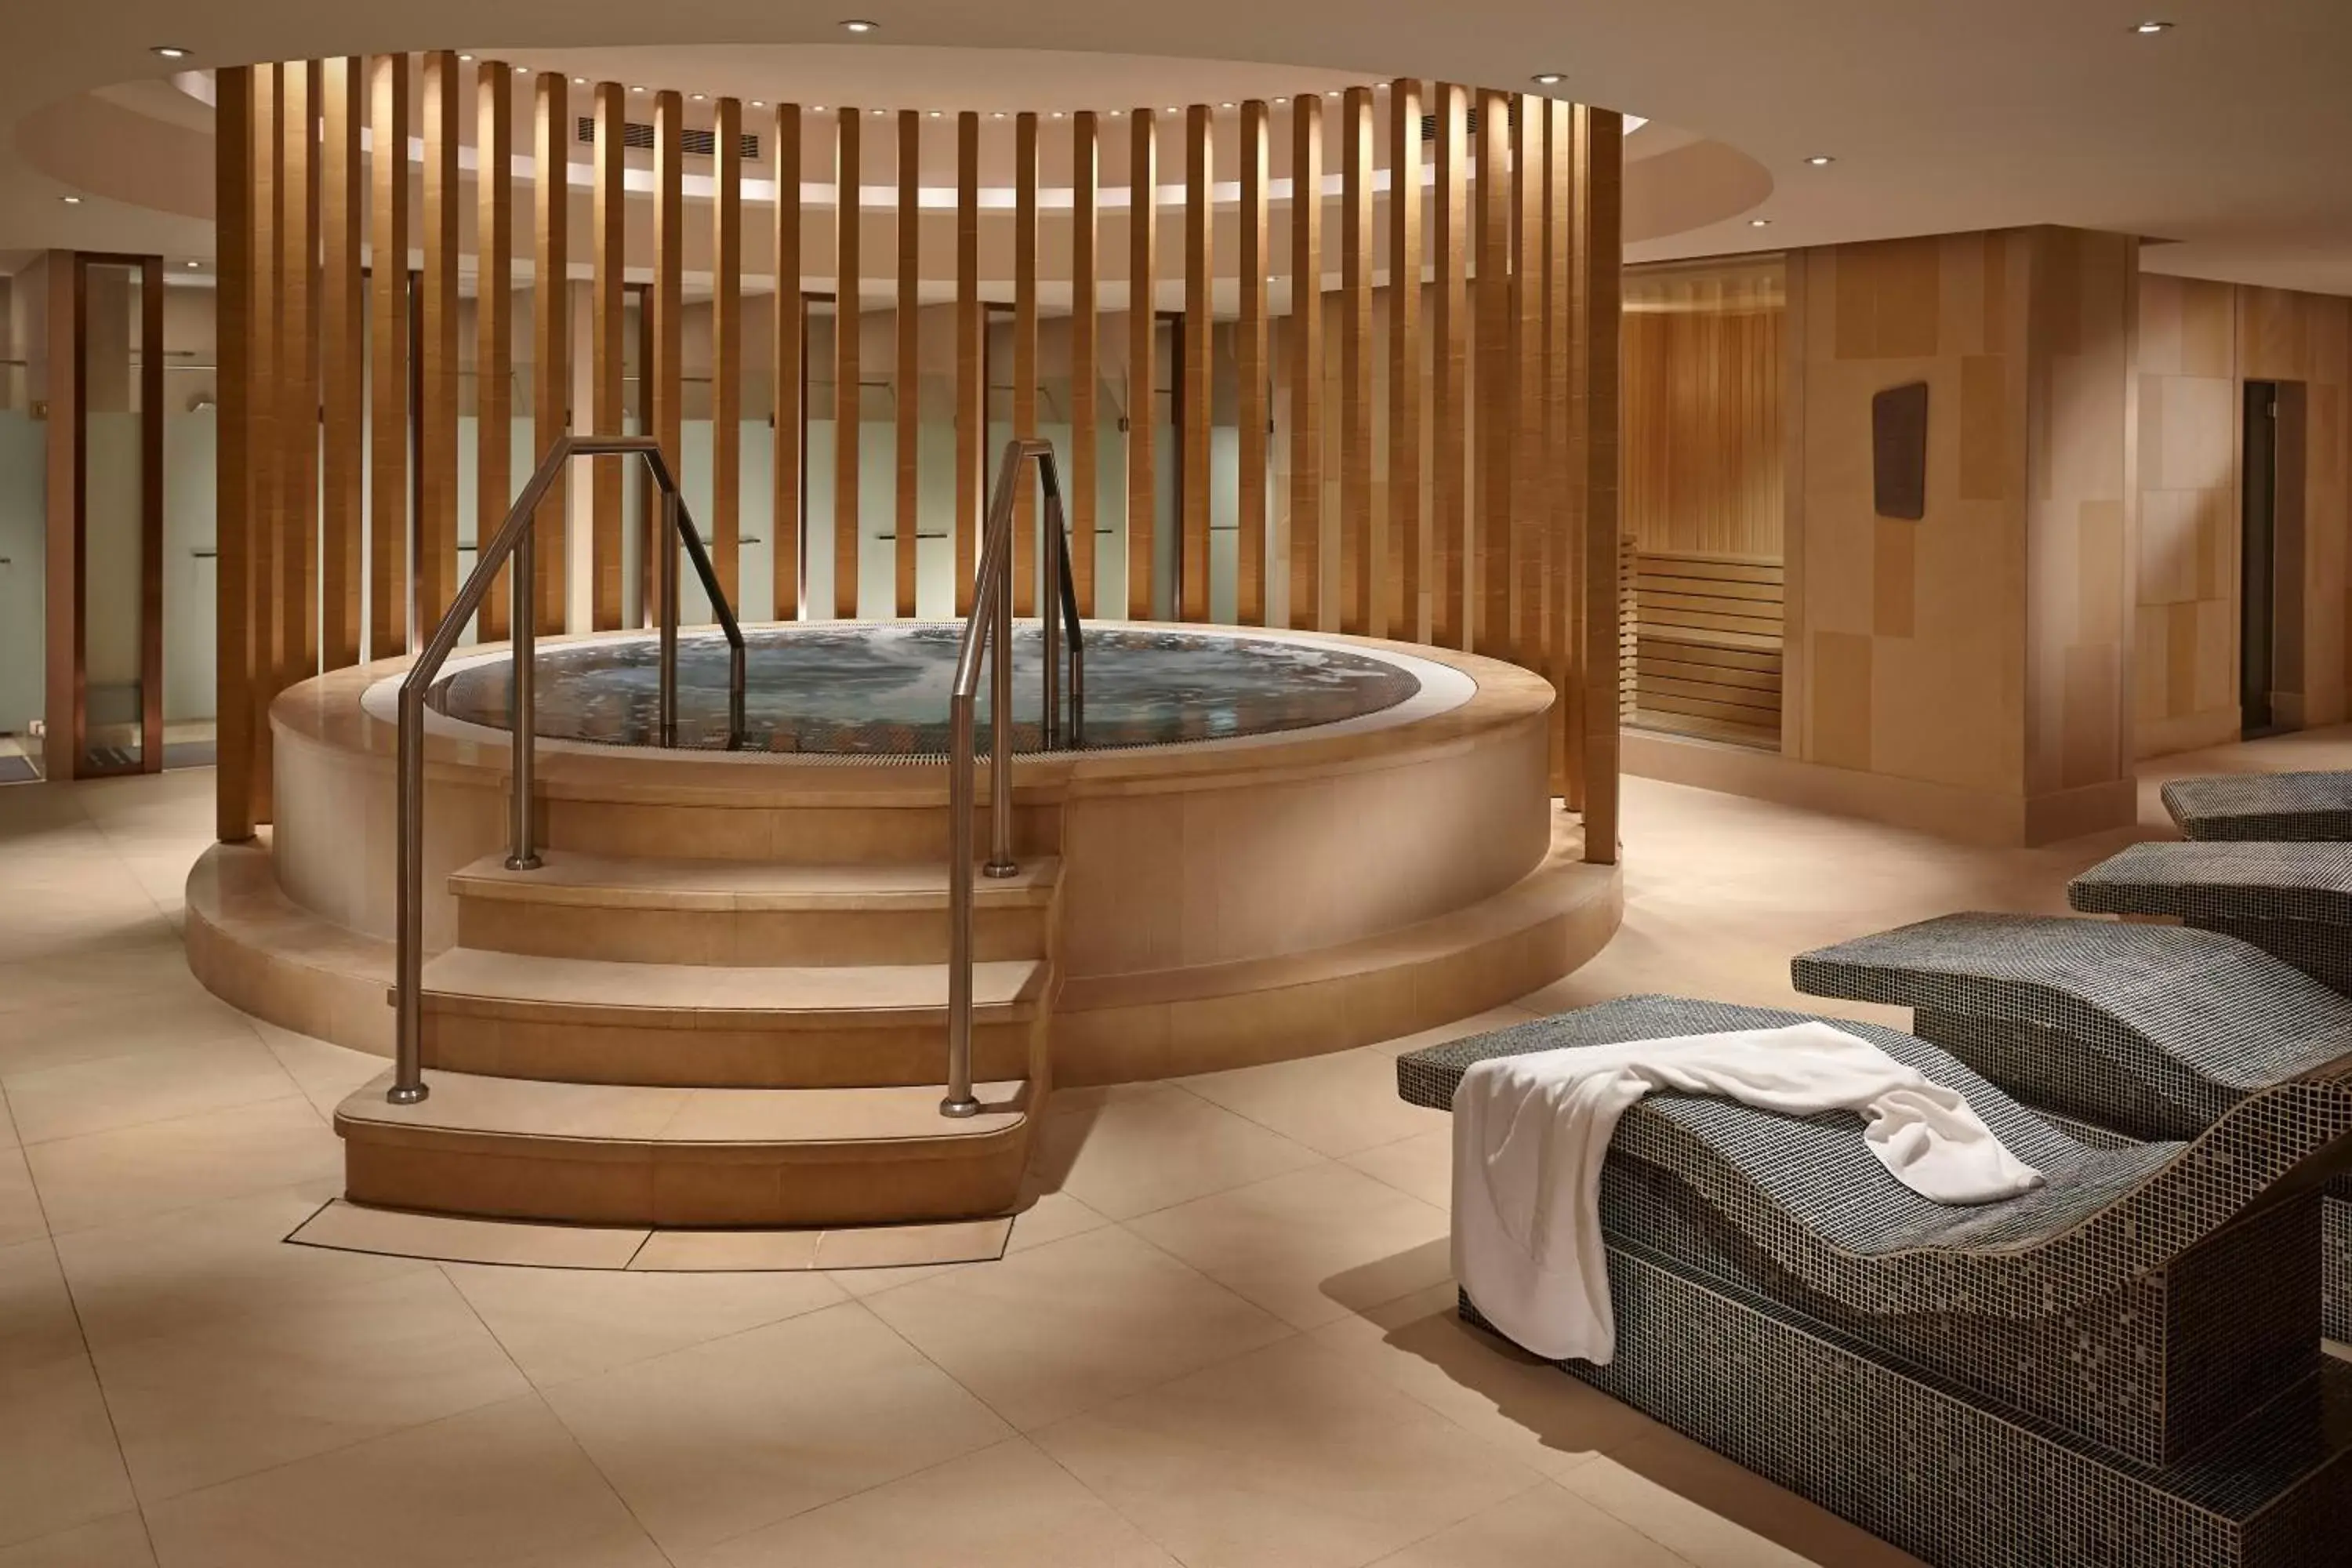 Spa and wellness centre/facilities in Kerry Hotel, Beijing